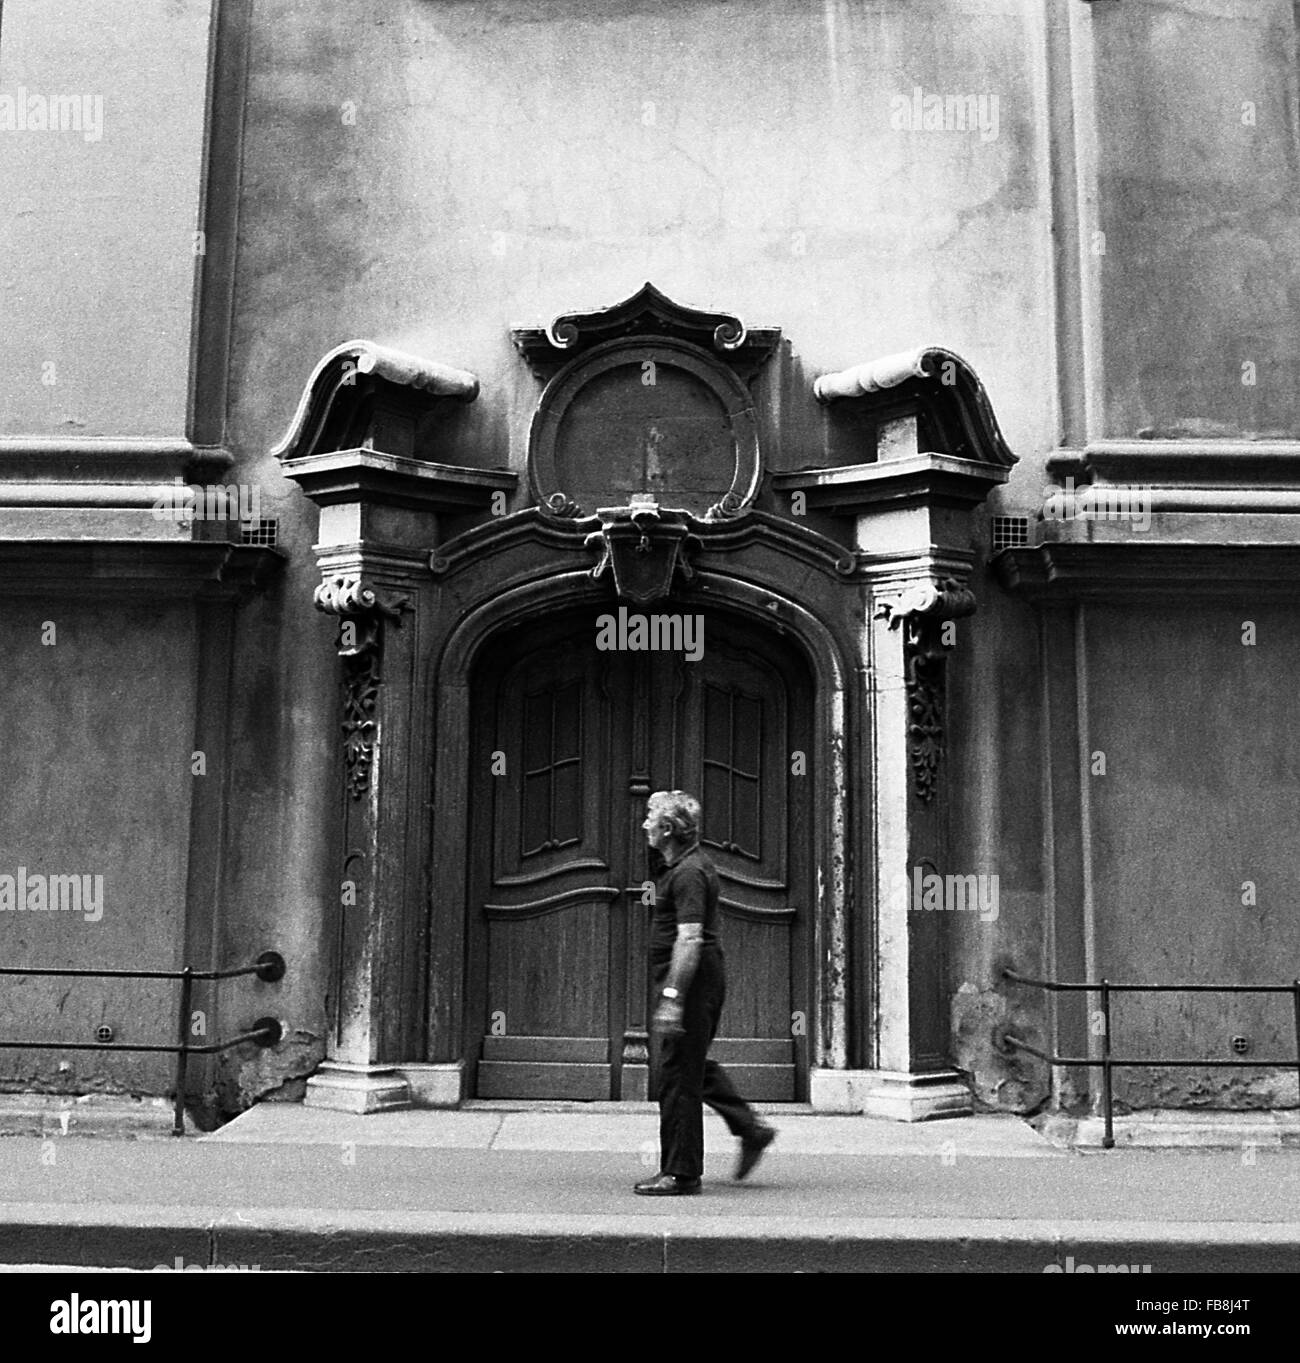 Glance on Bupapest at the time of the Nineties. -  1990  -  Hungary / Budapest  -  Glance on Bupapest at the time of the Nineties. -  Passer-by in front of a side door of St Anne's church.   -  Philippe Gras / Le Pictorium Stock Photo